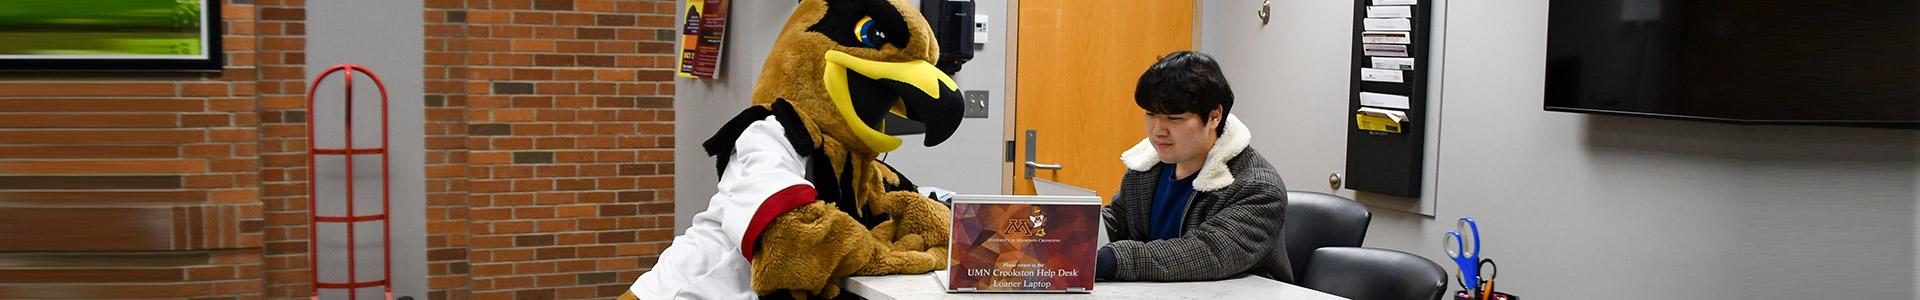 Student employee helping Regal the Eagle with his laptop in the Computer Help Desk Lobby